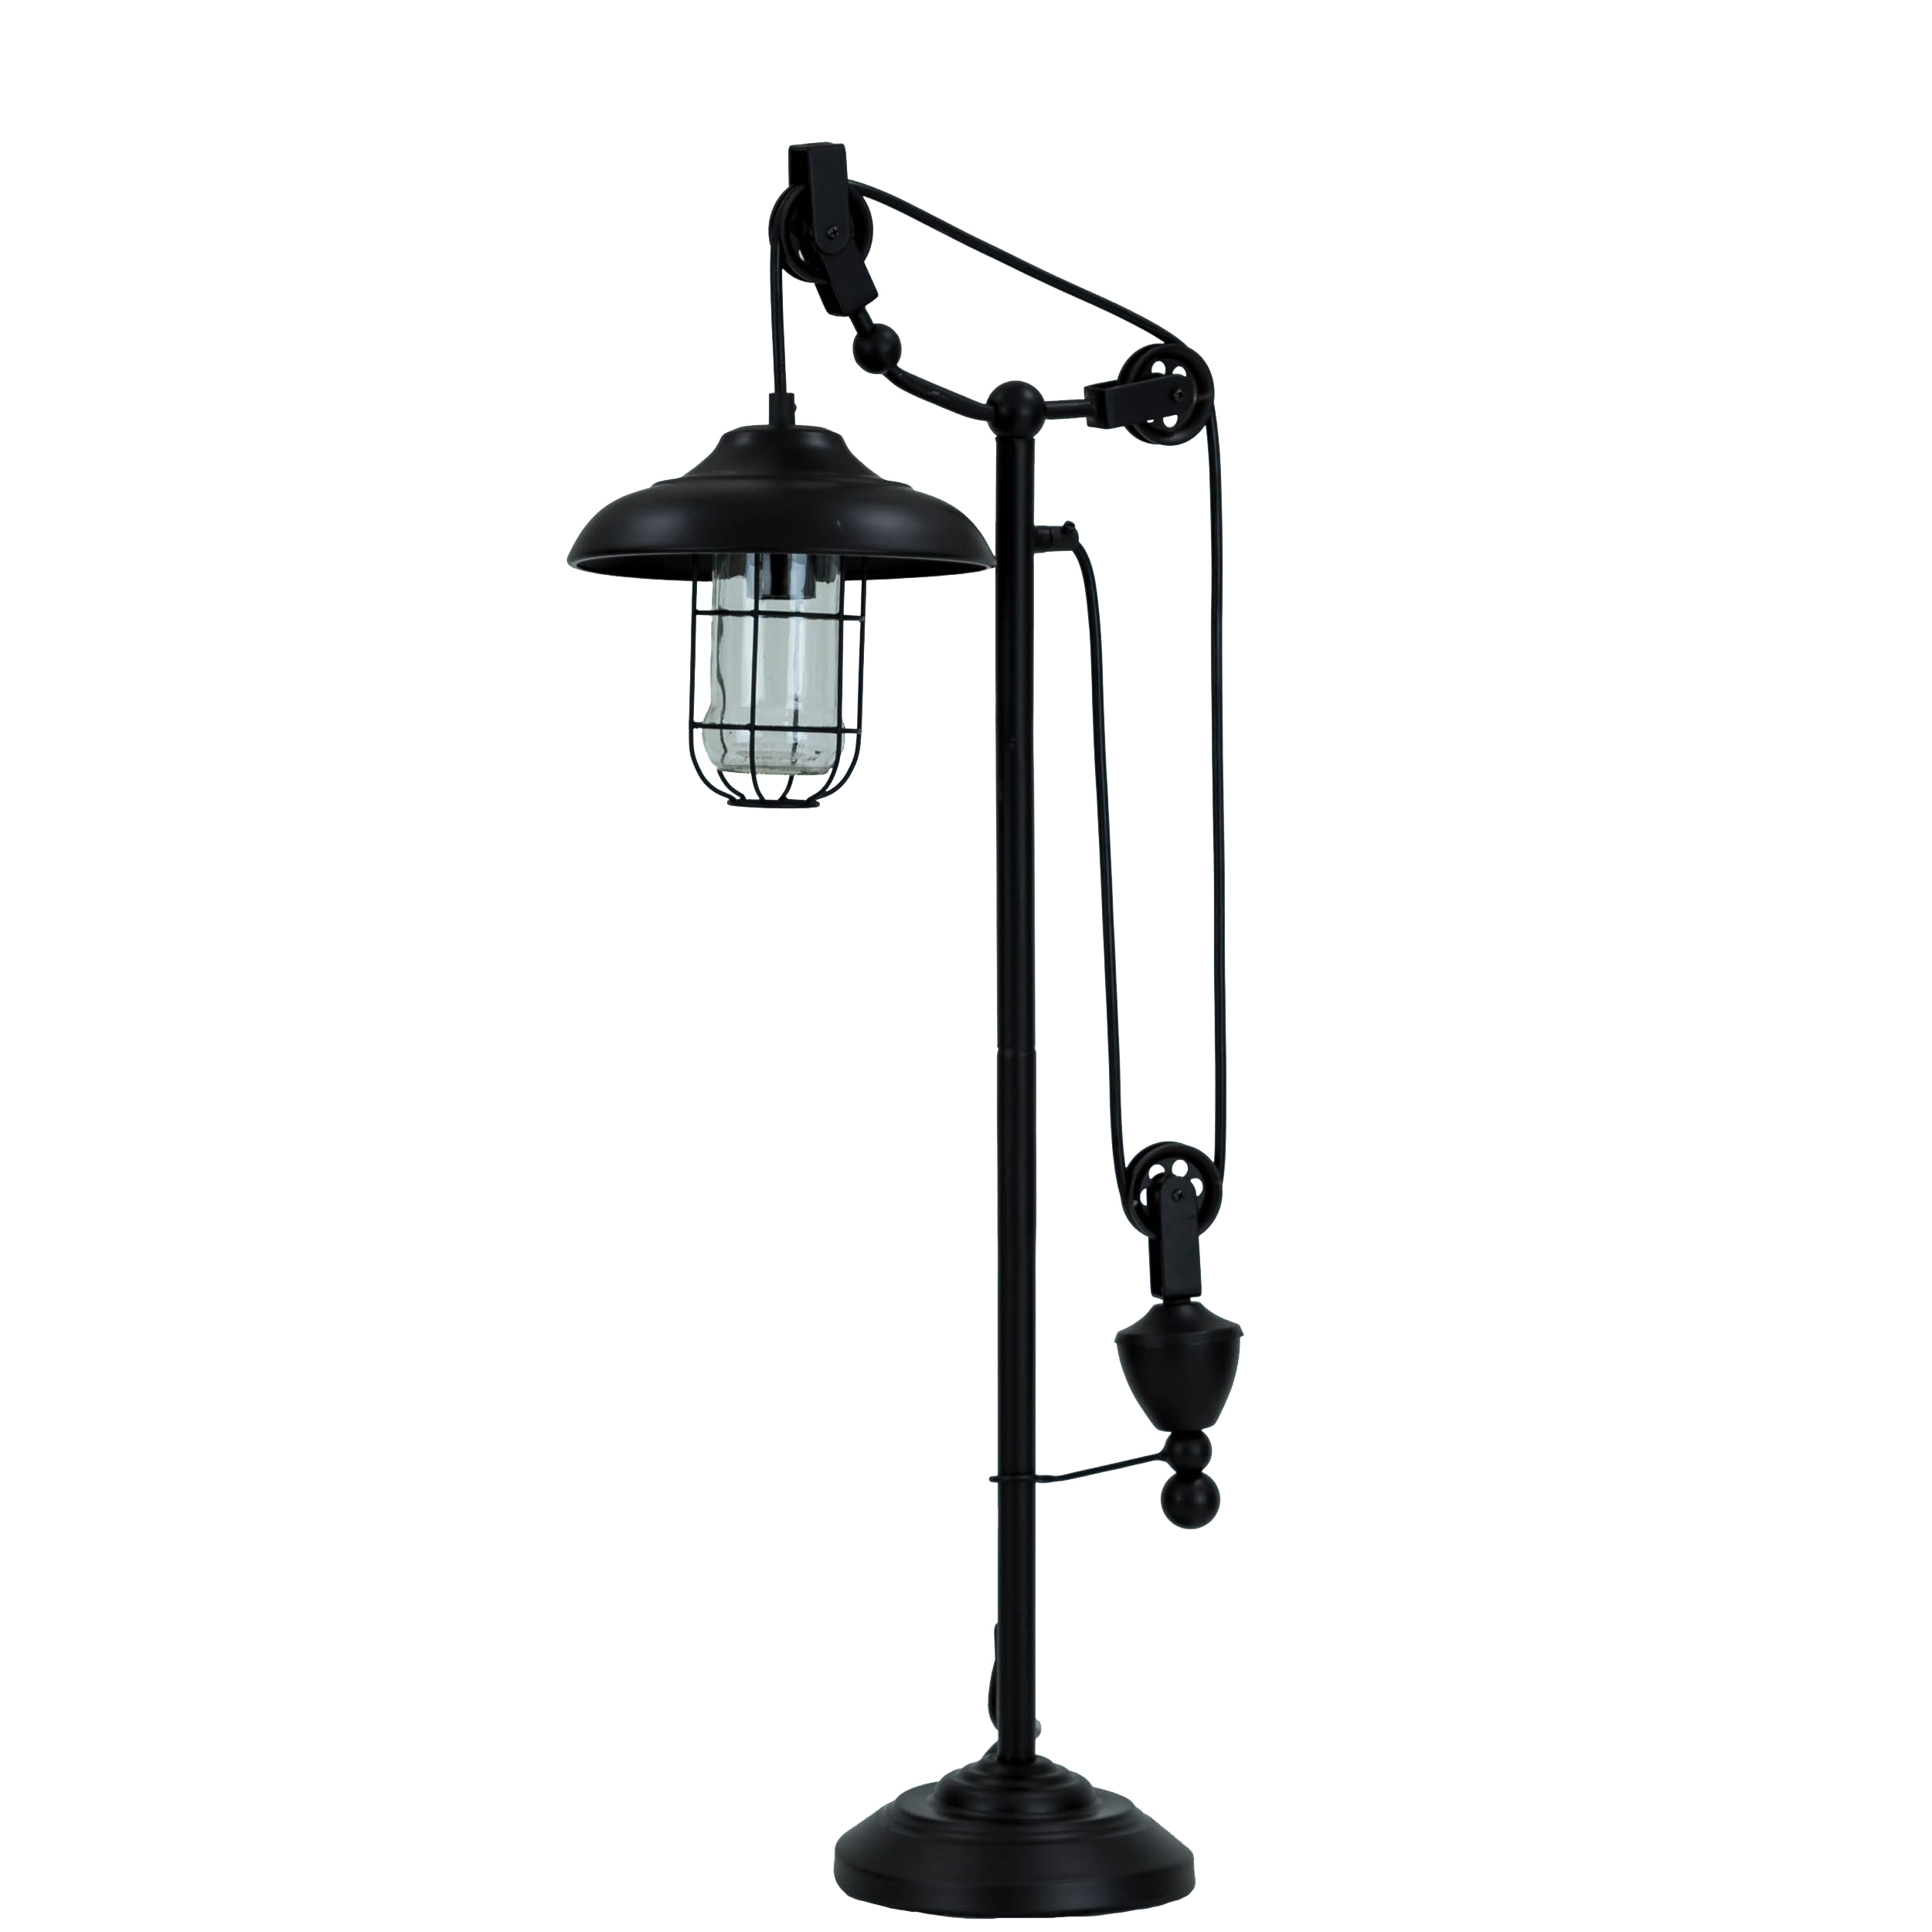 Michael Anthony Adjustable Black Table Lamp Walmart in sizing 2500 X 2500